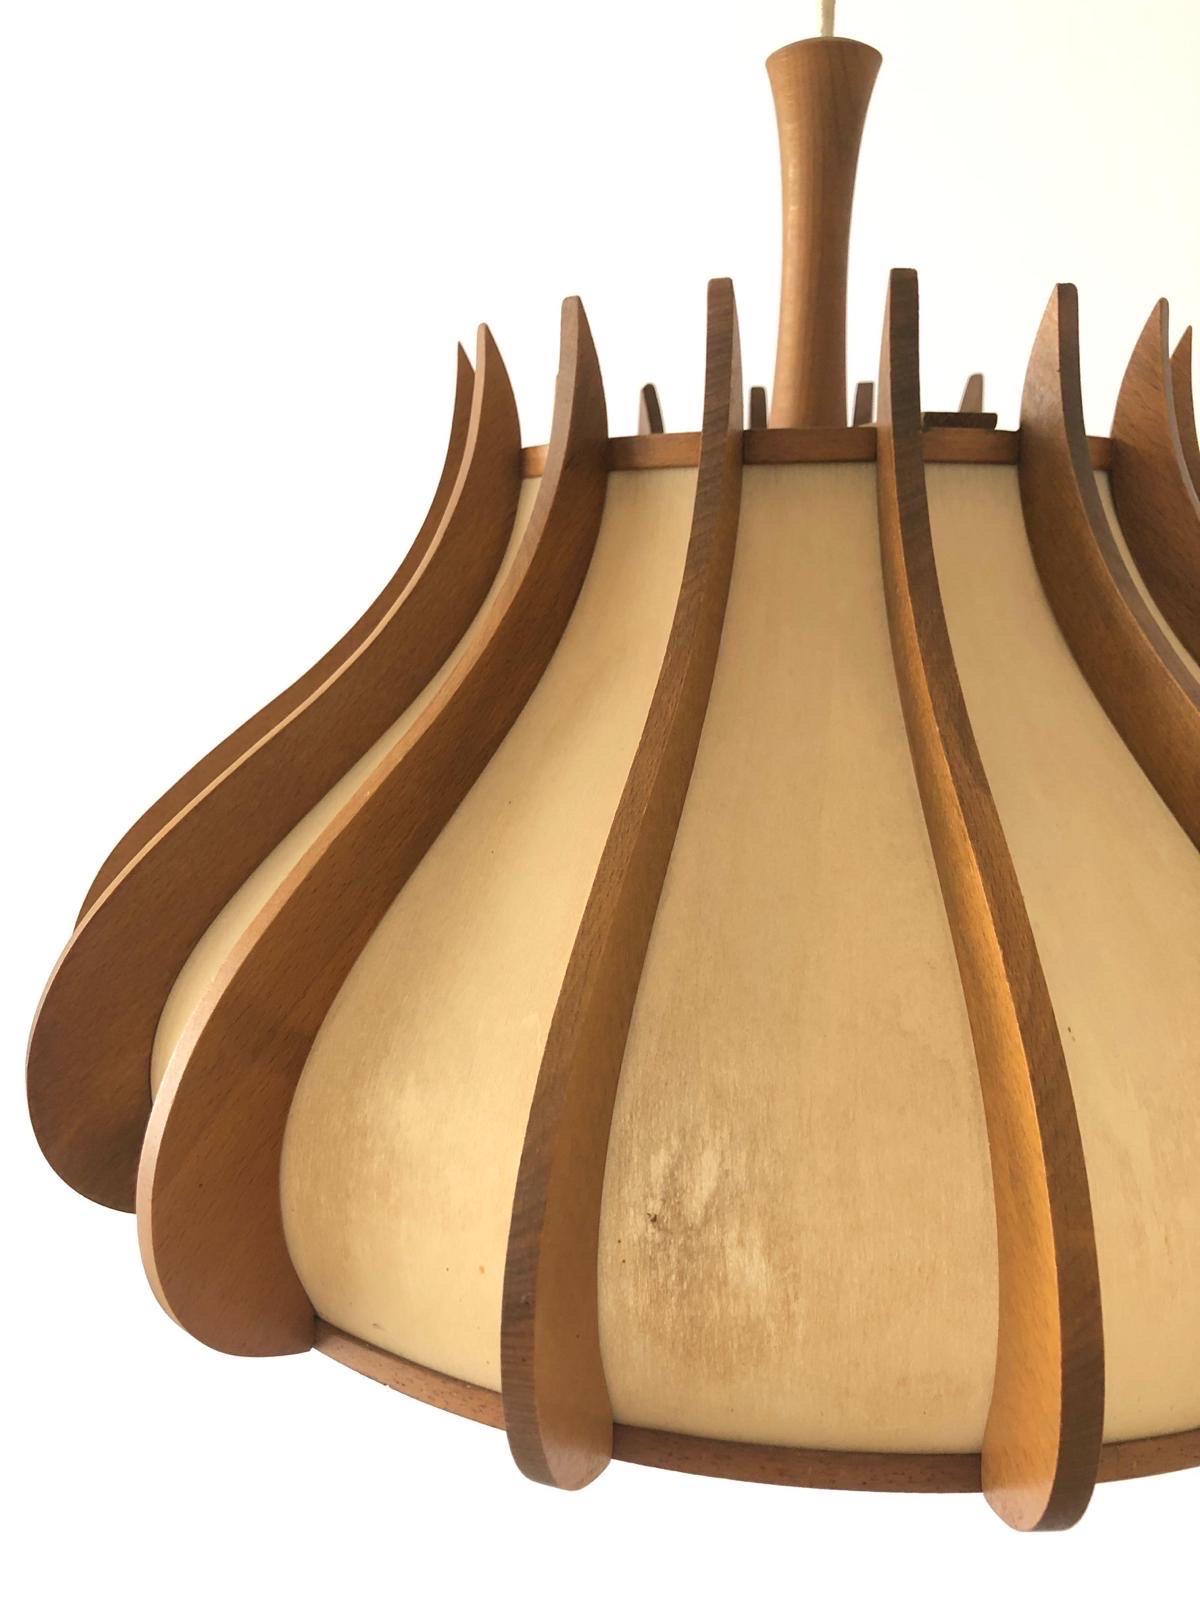 Unusual design Wood and Plastic Paper Large Pendant Lamp, 1960s, Germany For Sale 2